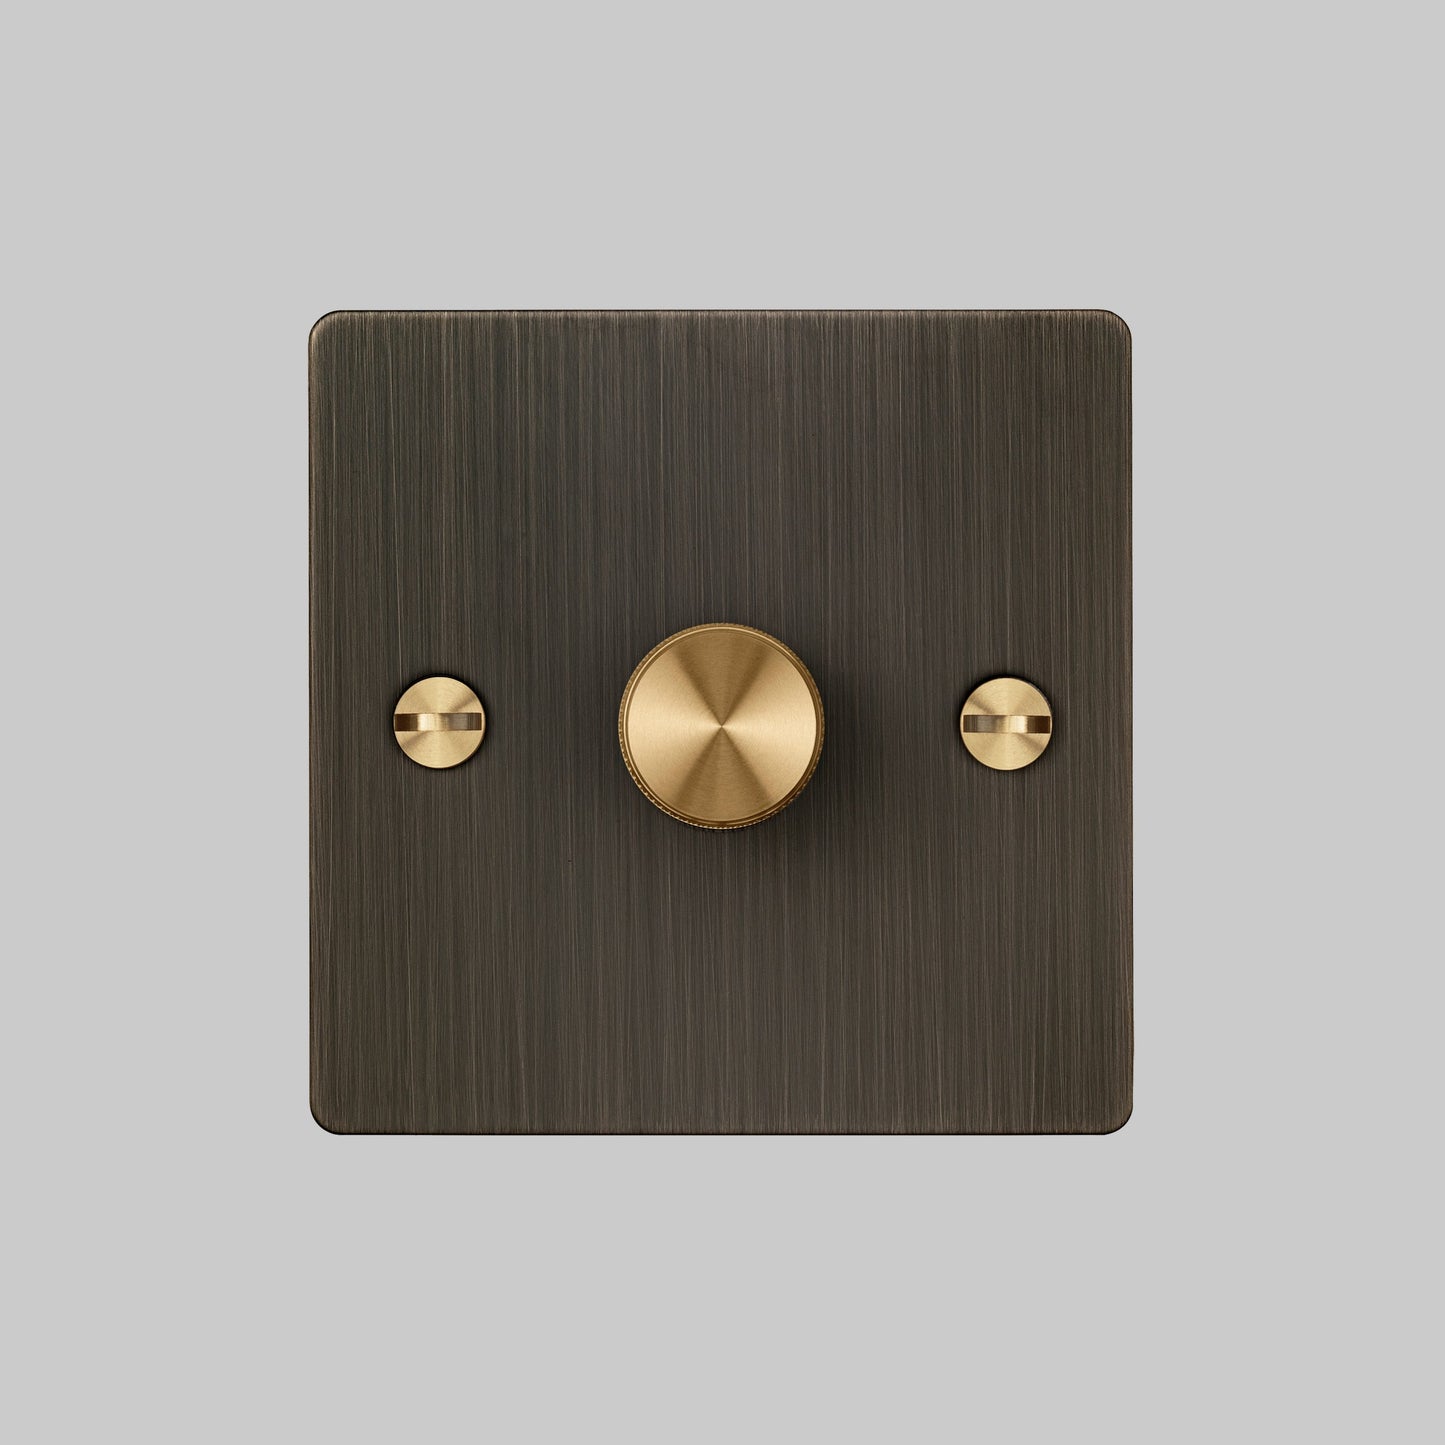 1G Dimmer/ 100W/ Smoked Bronze with brass details, front view.